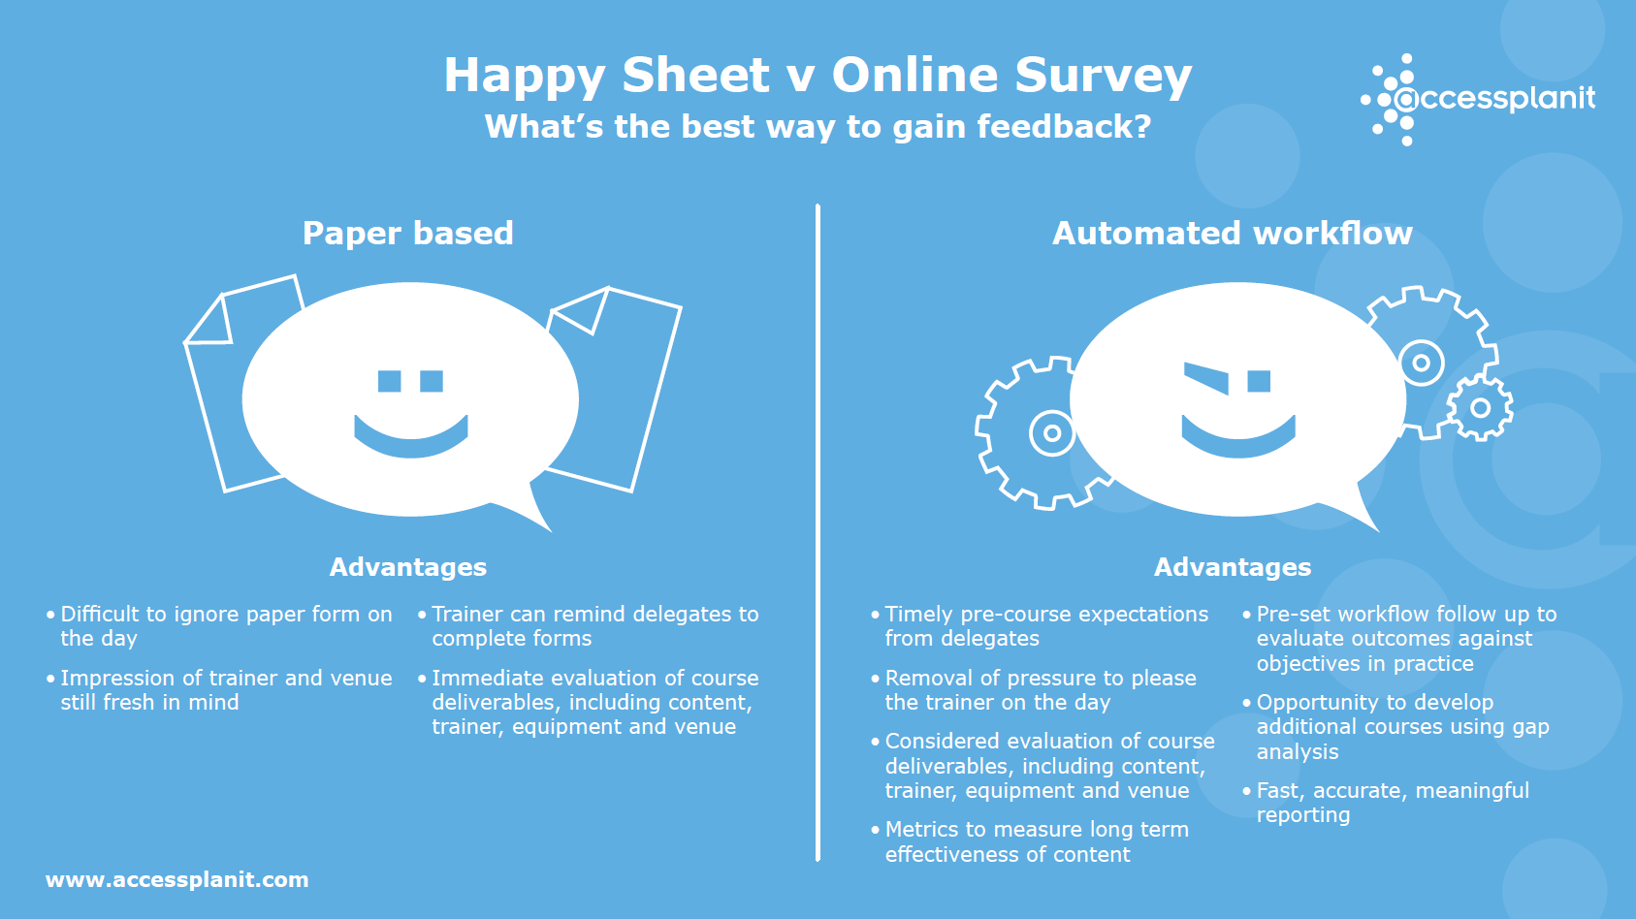 Comparison of paper based evaluation or happy sheets and automated evaluation or workflows